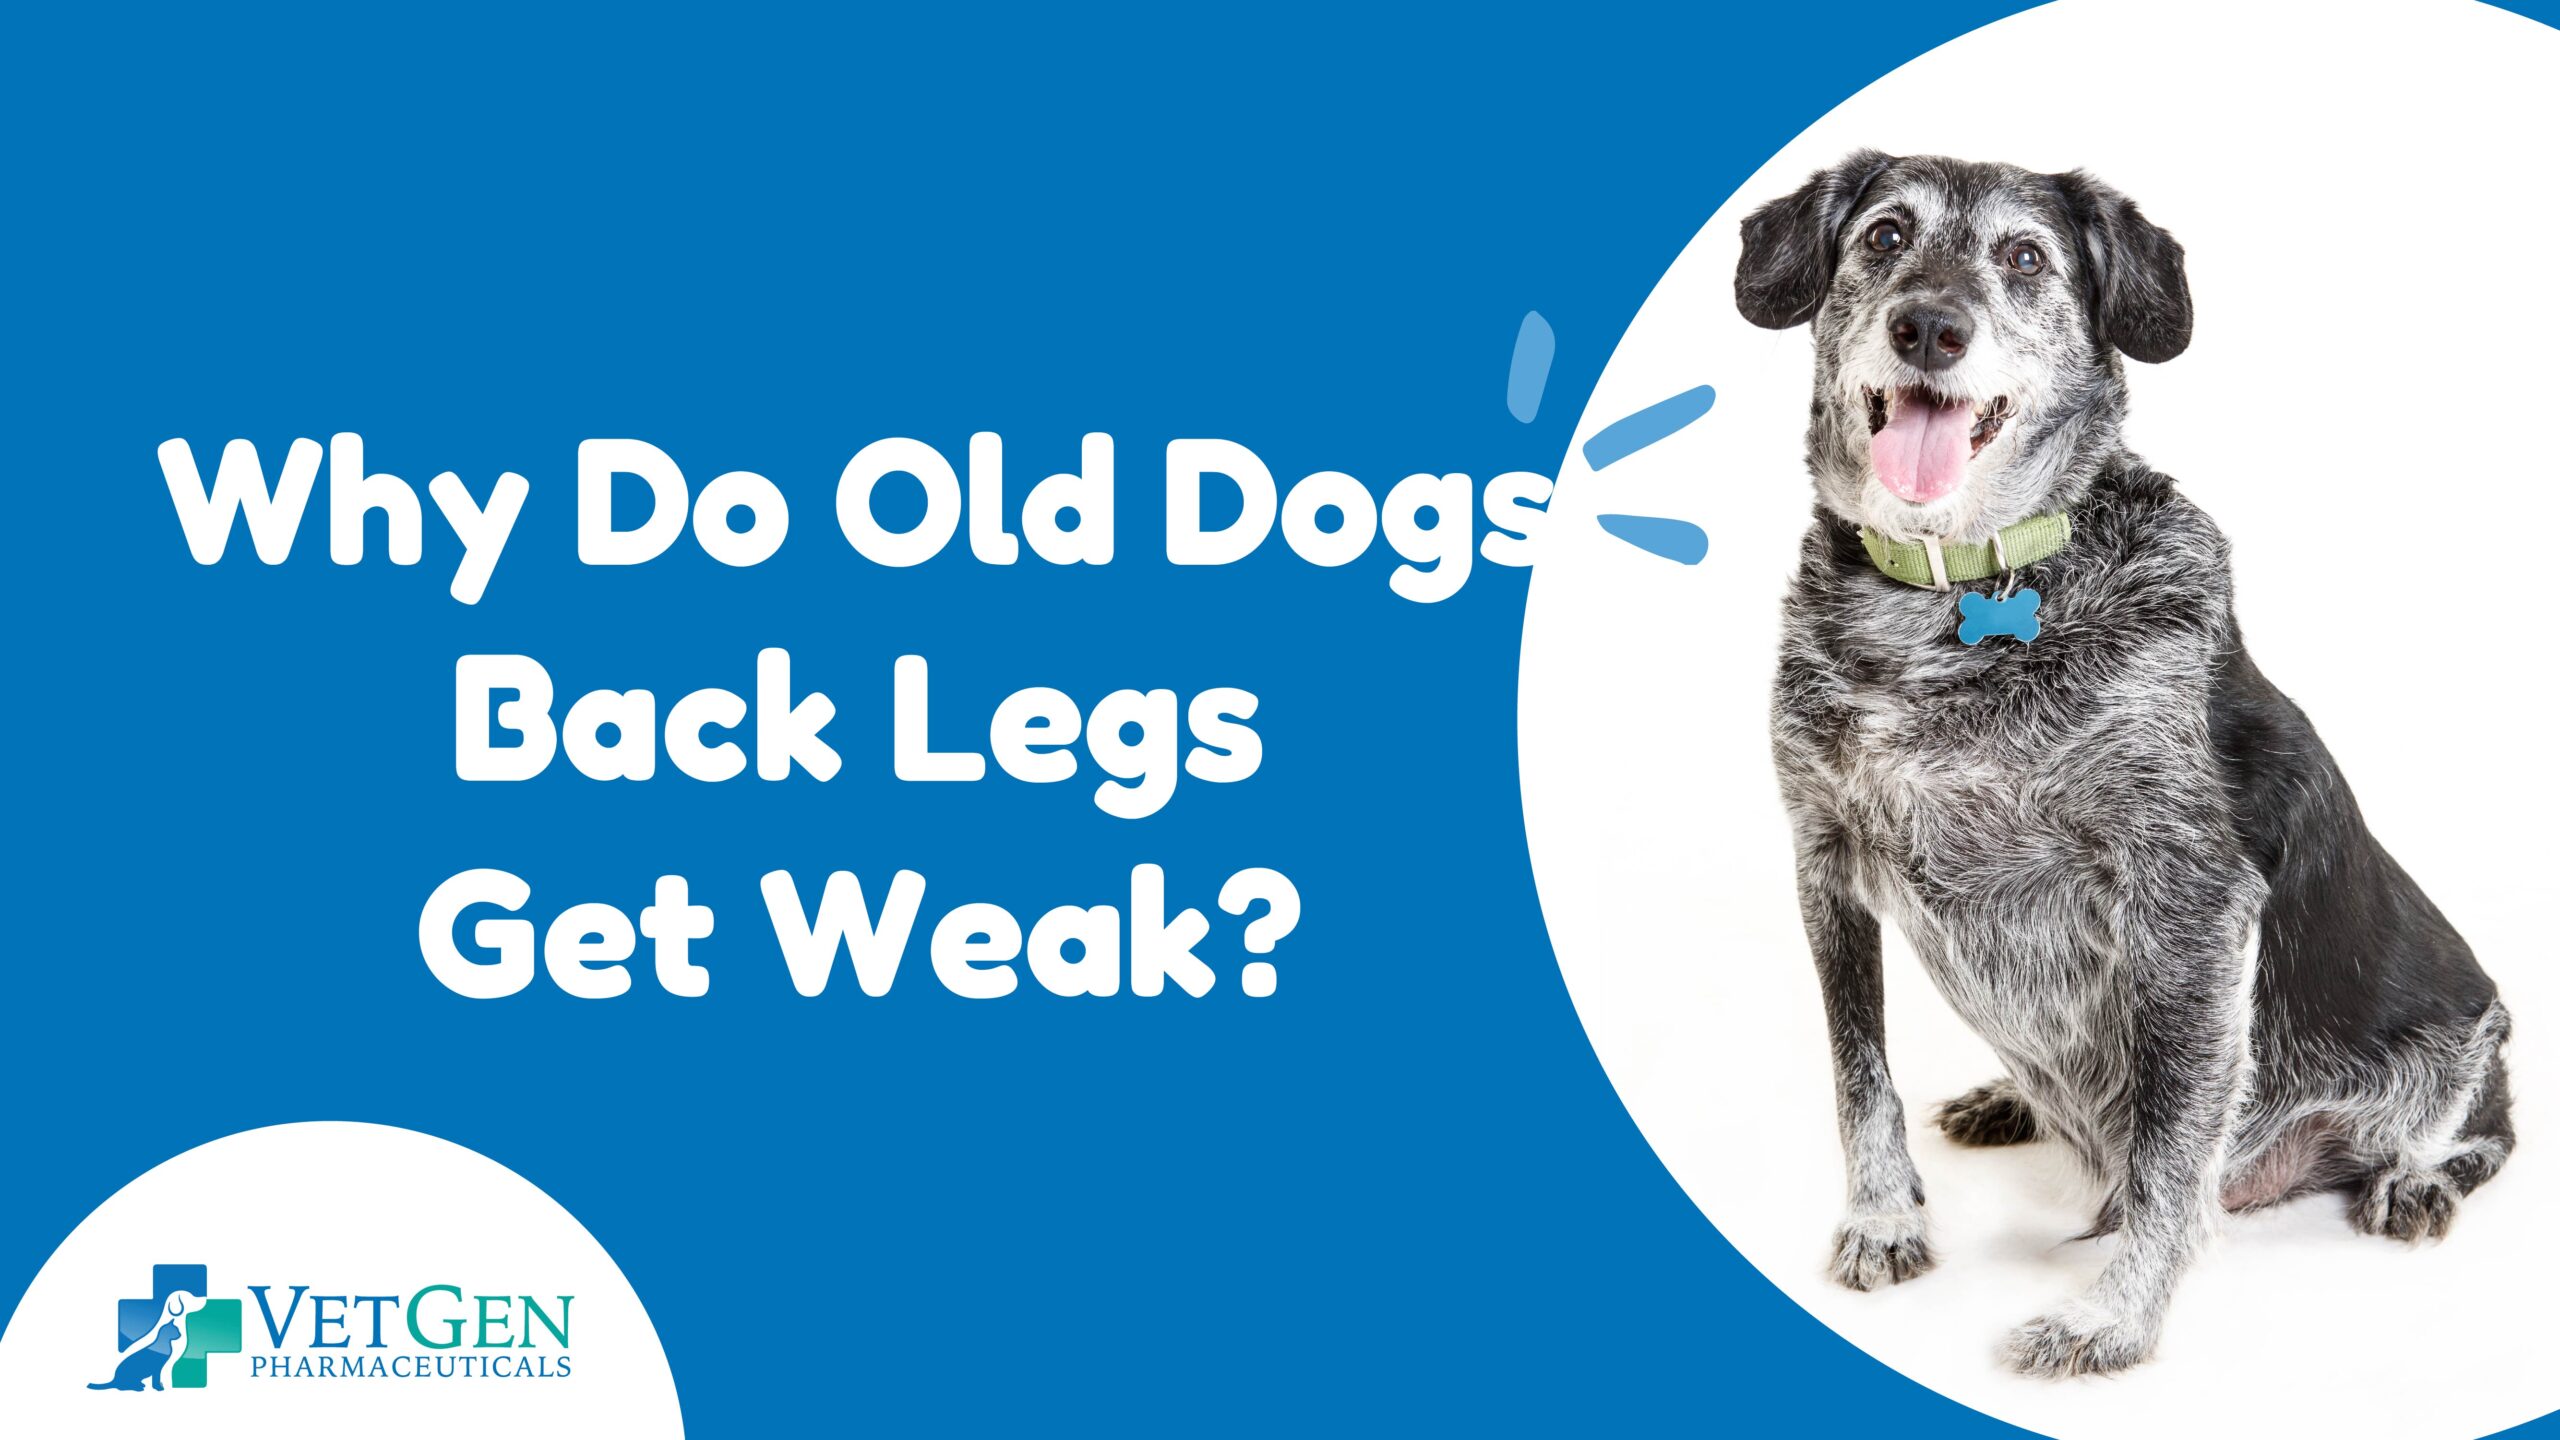 Why Do Old Dogs Back Legs Get Weak?